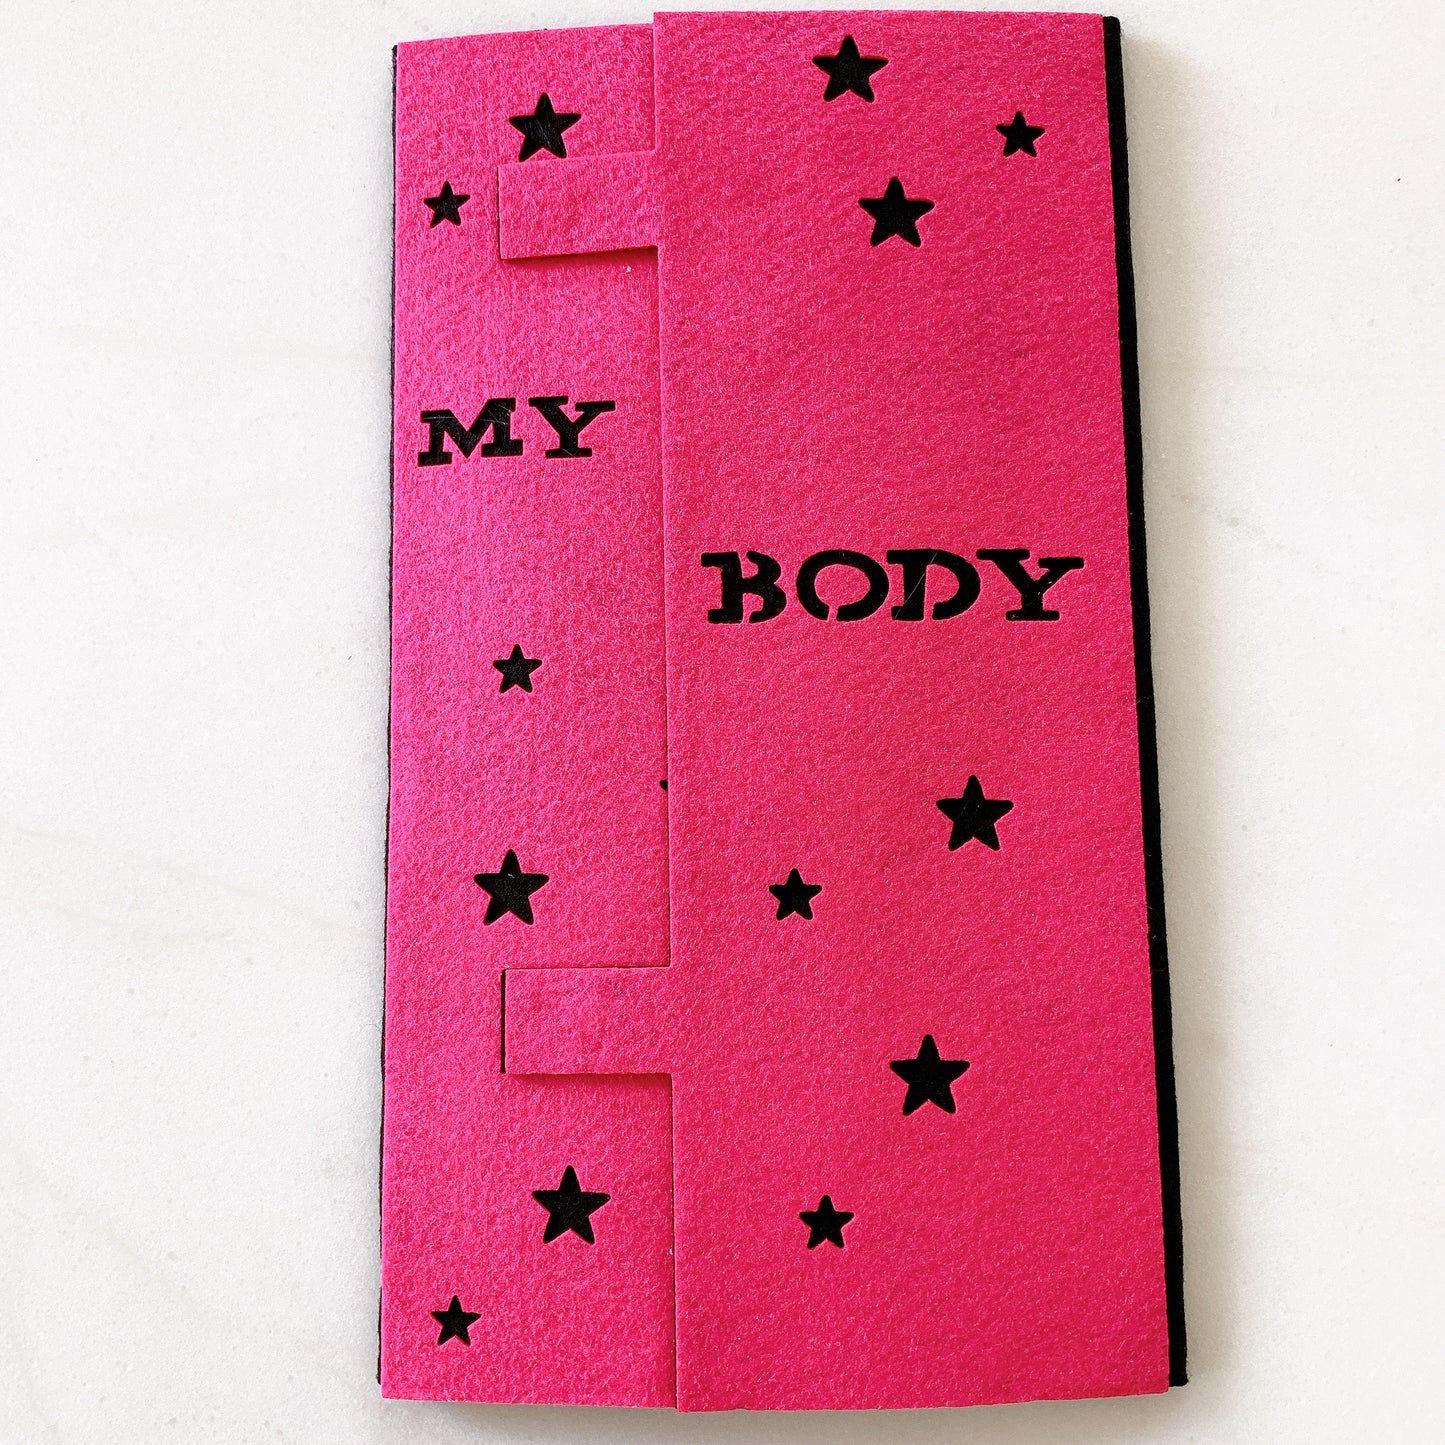 Busy Book Human Body